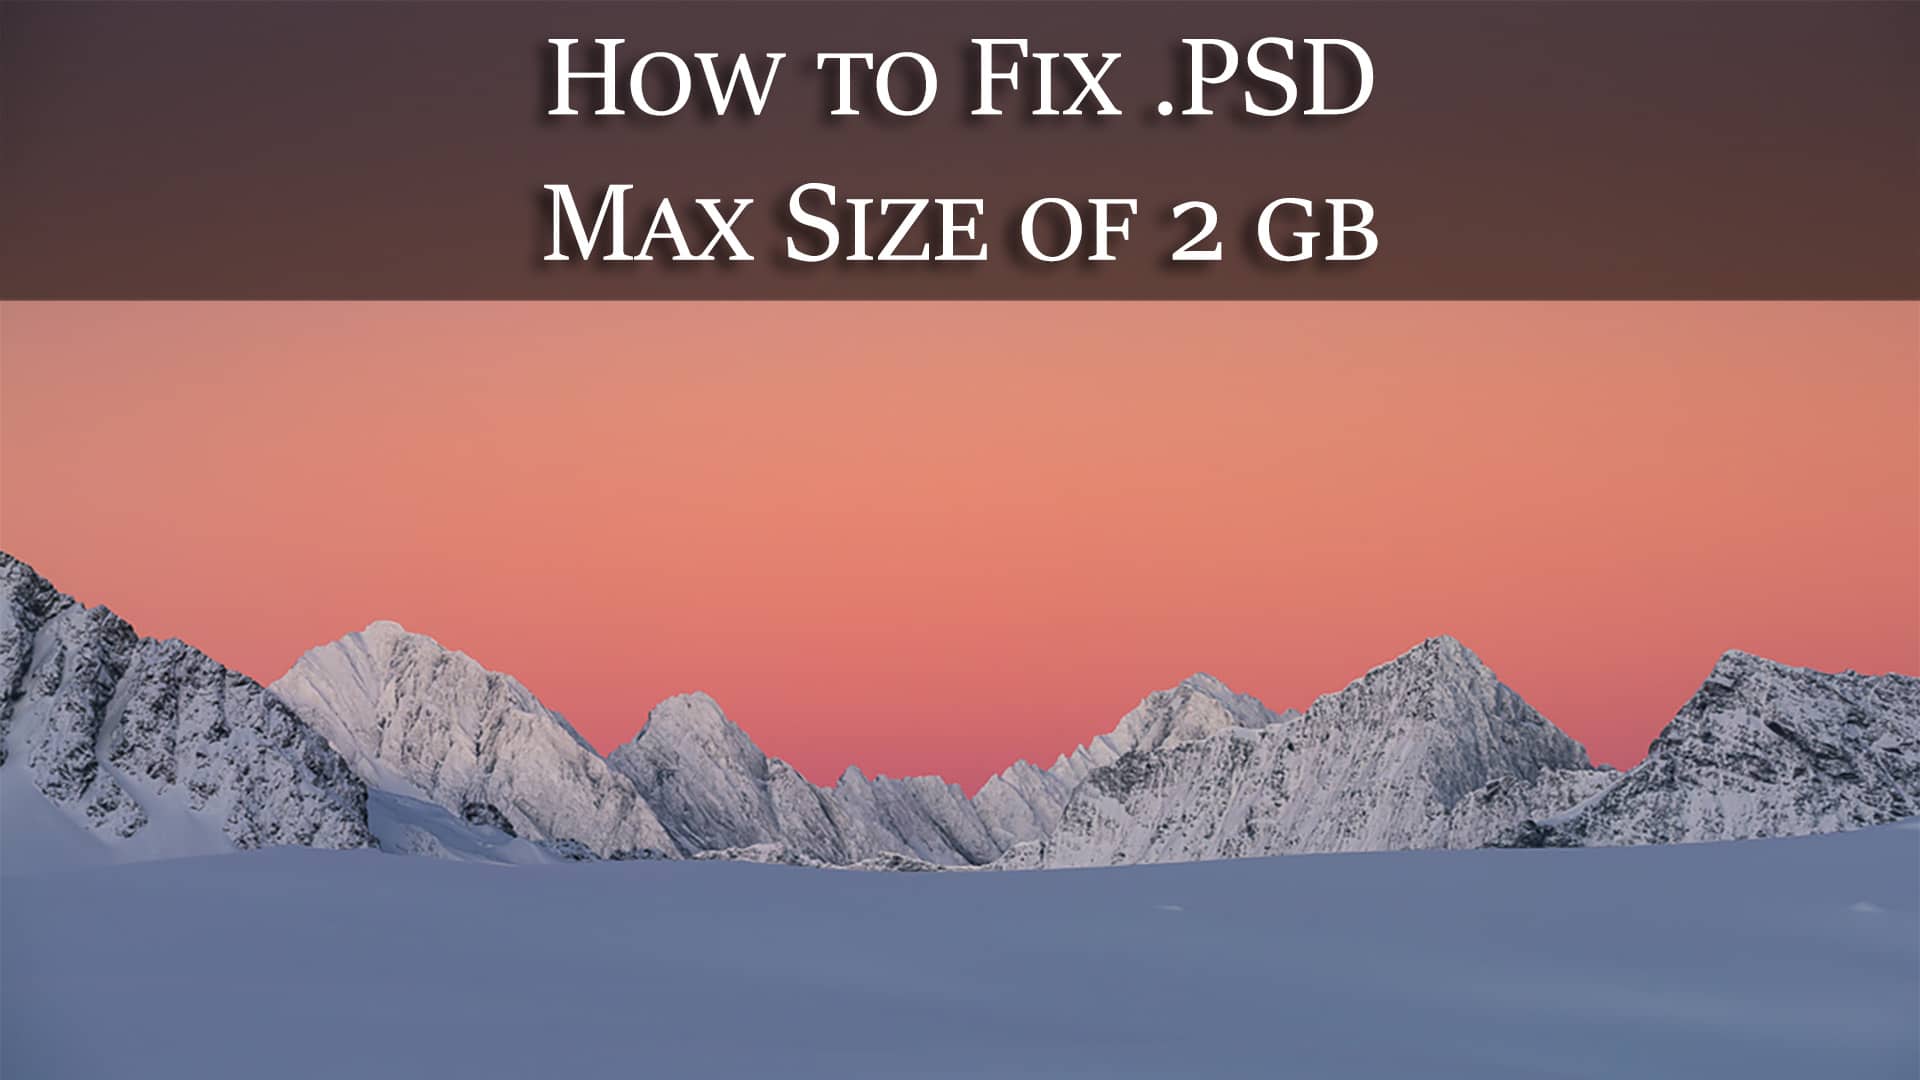 Fix .PSD 2GB max size on Photoshop feature image